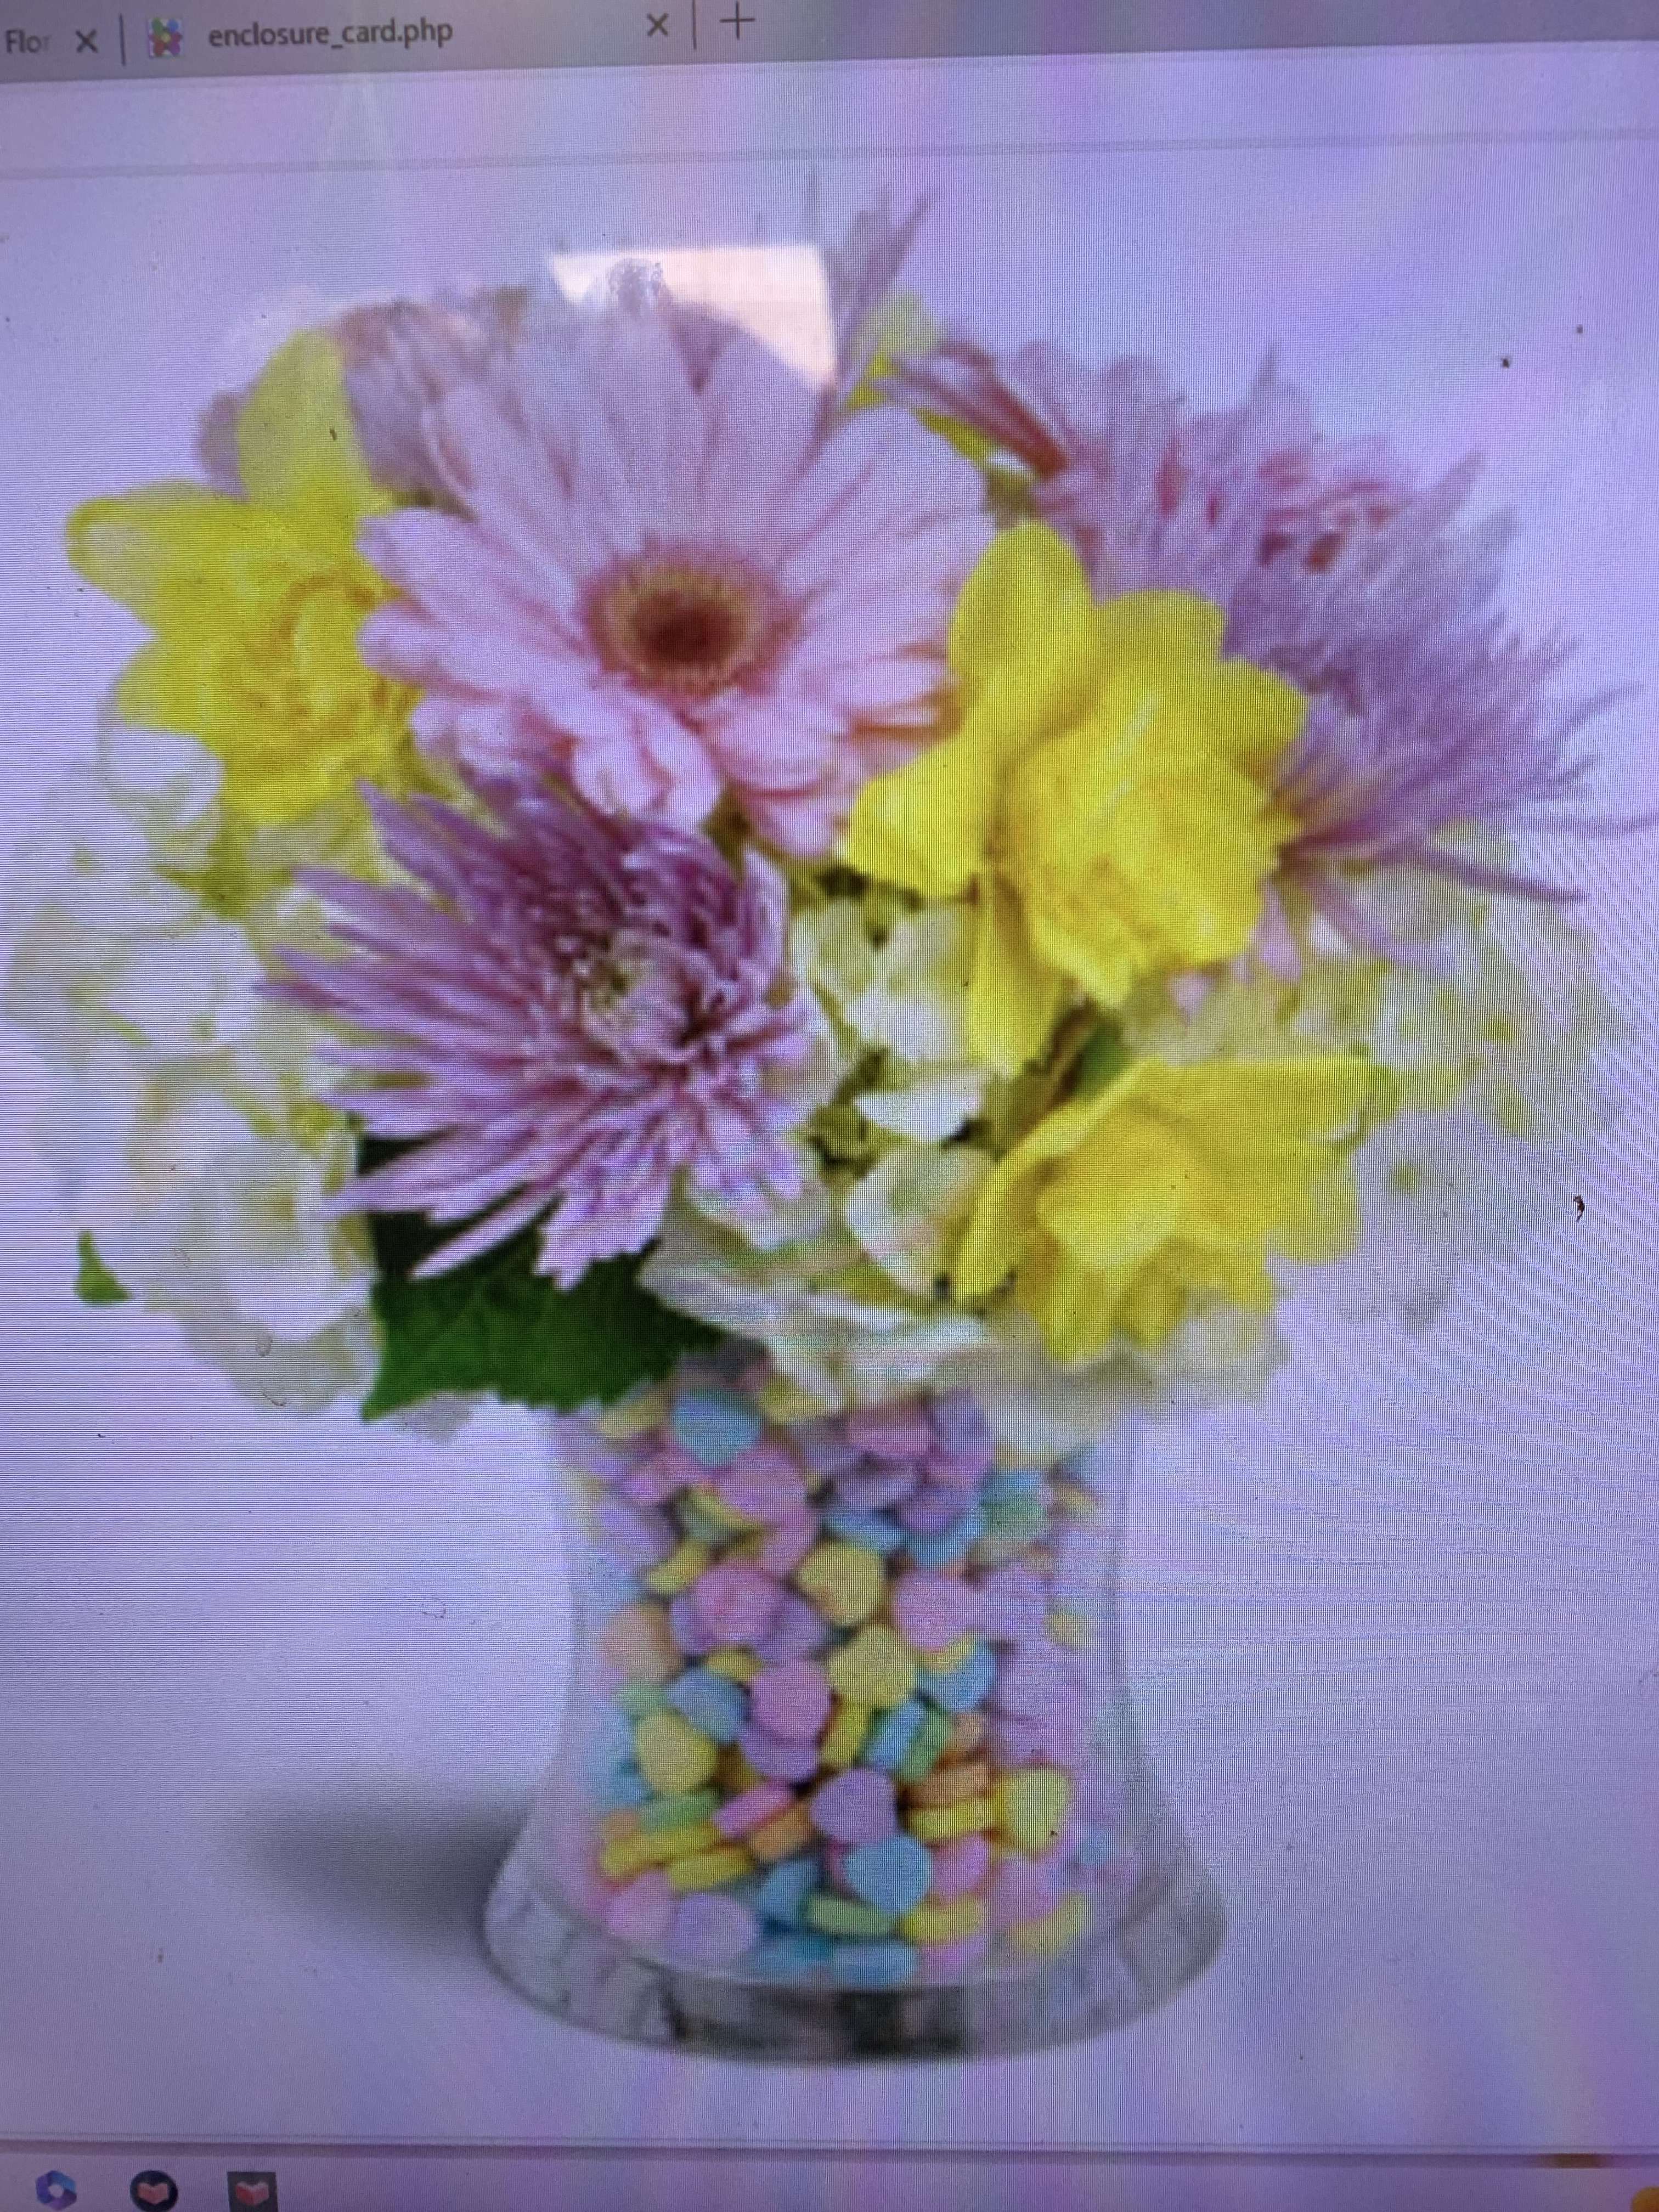 SWEET TREAT  - FLOWERS WITH A CANDY FILLED VASE